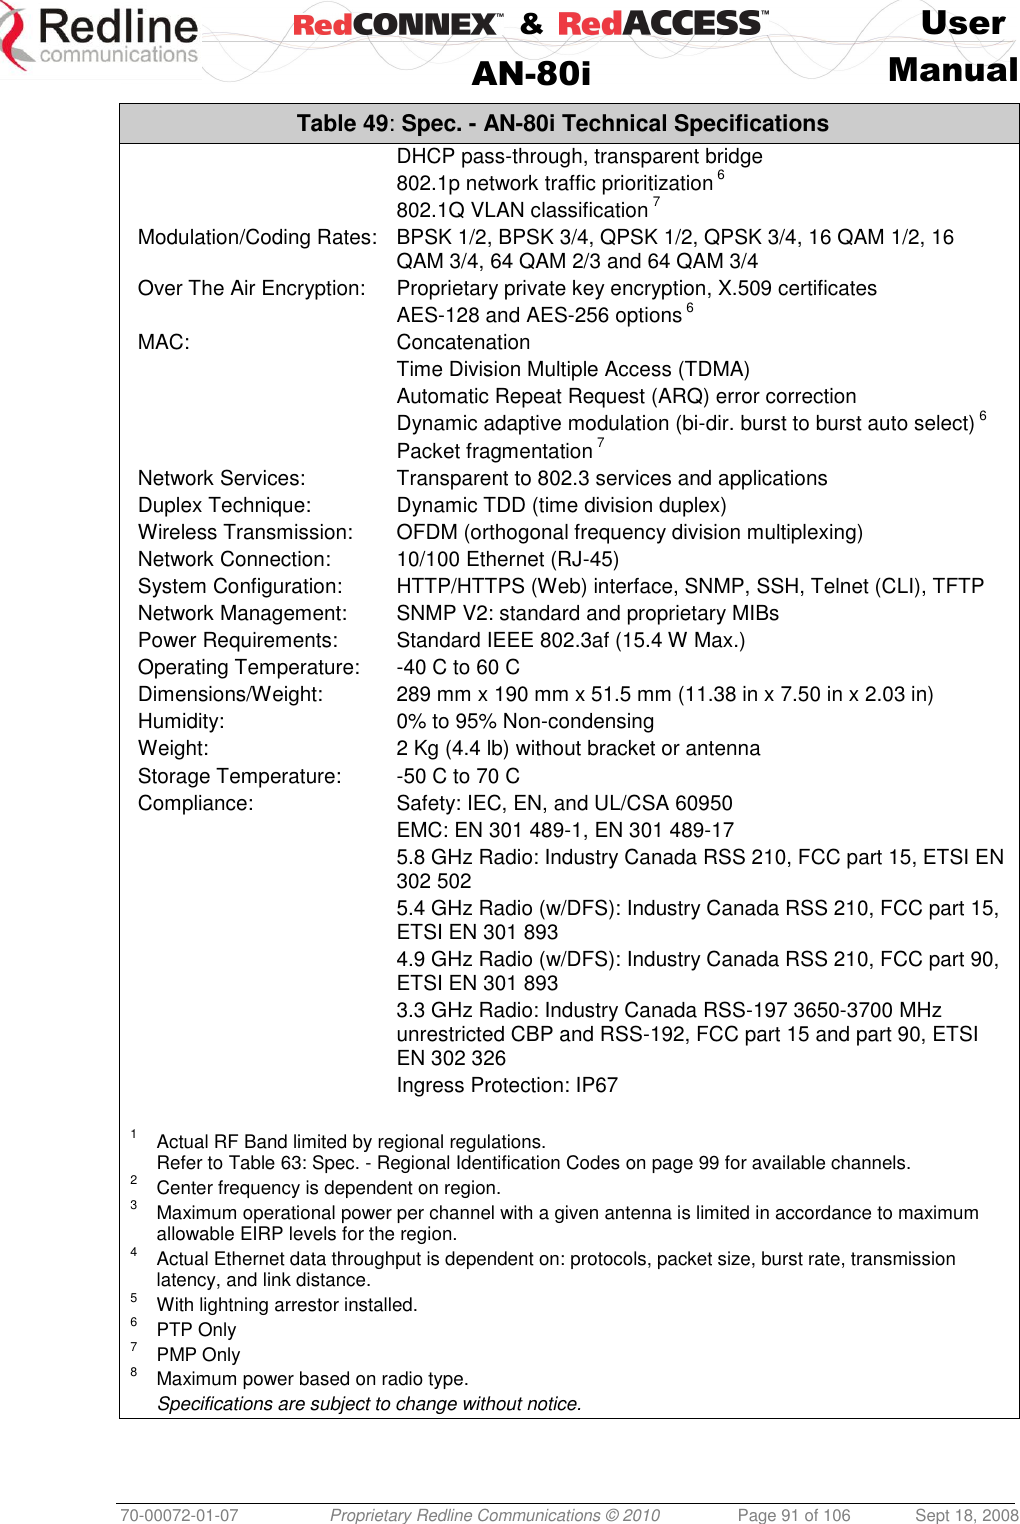    &amp;  User  AN-80i Manual  70-00072-01-07 Proprietary Redline Communications © 2010  Page 91 of 106  Sept 18, 2008 Table 49: Spec. - AN-80i Technical Specifications   DHCP pass-through, transparent bridge   802.1p network traffic prioritization 6   802.1Q VLAN classification 7 Modulation/Coding Rates:  BPSK 1/2, BPSK 3/4, QPSK 1/2, QPSK 3/4, 16 QAM 1/2, 16 QAM 3/4, 64 QAM 2/3 and 64 QAM 3/4 Over The Air Encryption:  Proprietary private key encryption, X.509 certificates   AES-128 and AES-256 options 6 MAC:  Concatenation   Time Division Multiple Access (TDMA)   Automatic Repeat Request (ARQ) error correction   Dynamic adaptive modulation (bi-dir. burst to burst auto select) 6   Packet fragmentation 7 Network Services:  Transparent to 802.3 services and applications Duplex Technique:  Dynamic TDD (time division duplex) Wireless Transmission:  OFDM (orthogonal frequency division multiplexing) Network Connection:  10/100 Ethernet (RJ-45) System Configuration:  HTTP/HTTPS (Web) interface, SNMP, SSH, Telnet (CLI), TFTP Network Management:  SNMP V2: standard and proprietary MIBs Power Requirements:  Standard IEEE 802.3af (15.4 W Max.) Operating Temperature:  -40 C to 60 C Dimensions/Weight:  289 mm x 190 mm x 51.5 mm (11.38 in x 7.50 in x 2.03 in) Humidity:  0% to 95% Non-condensing Weight:  2 Kg (4.4 lb) without bracket or antenna Storage Temperature:  -50 C to 70 C Compliance:  Safety: IEC, EN, and UL/CSA 60950   EMC: EN 301 489-1, EN 301 489-17   5.8 GHz Radio: Industry Canada RSS 210, FCC part 15, ETSI EN 302 502   5.4 GHz Radio (w/DFS): Industry Canada RSS 210, FCC part 15, ETSI EN 301 893   4.9 GHz Radio (w/DFS): Industry Canada RSS 210, FCC part 90, ETSI EN 301 893   3.3 GHz Radio: Industry Canada RSS-197 3650-3700 MHz unrestricted CBP and RSS-192, FCC part 15 and part 90, ETSI EN 302 326   Ingress Protection: IP67  1  Actual RF Band limited by regional regulations. Refer to Table 63: Spec. - Regional Identification Codes on page 99 for available channels. 2  Center frequency is dependent on region. 3   Maximum operational power per channel with a given antenna is limited in accordance to maximum allowable EIRP levels for the region. 4  Actual Ethernet data throughput is dependent on: protocols, packet size, burst rate, transmission latency, and link distance. 5  With lightning arrestor installed. 6  PTP Only 7  PMP Only 8  Maximum power based on radio type.   Specifications are subject to change without notice.  